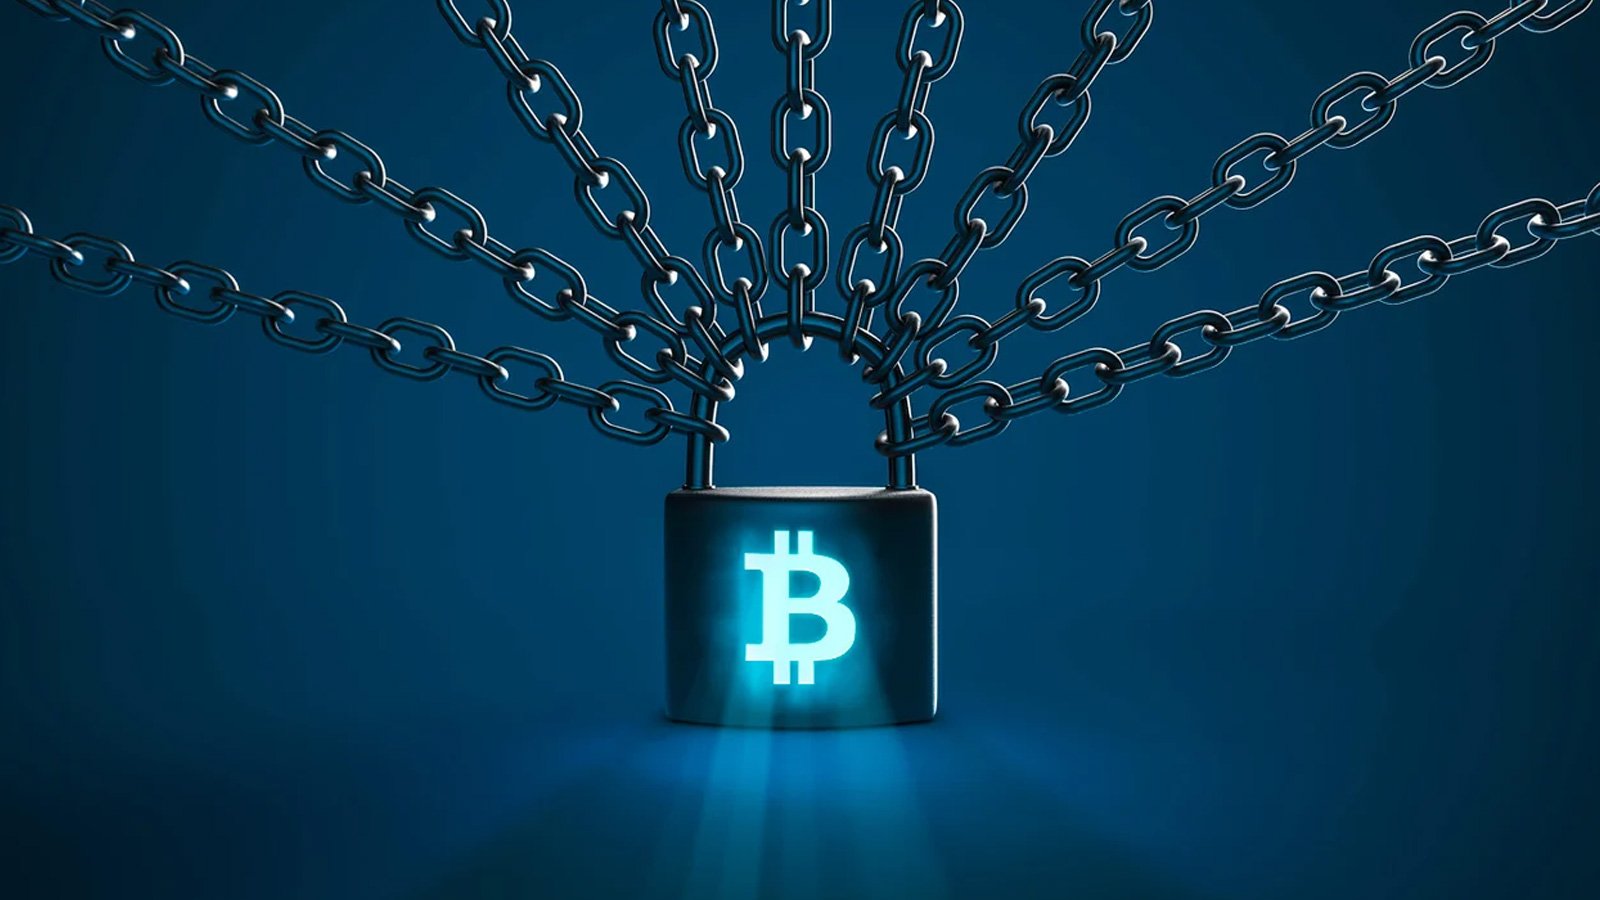 Lock with a bitcoin symbol in chains